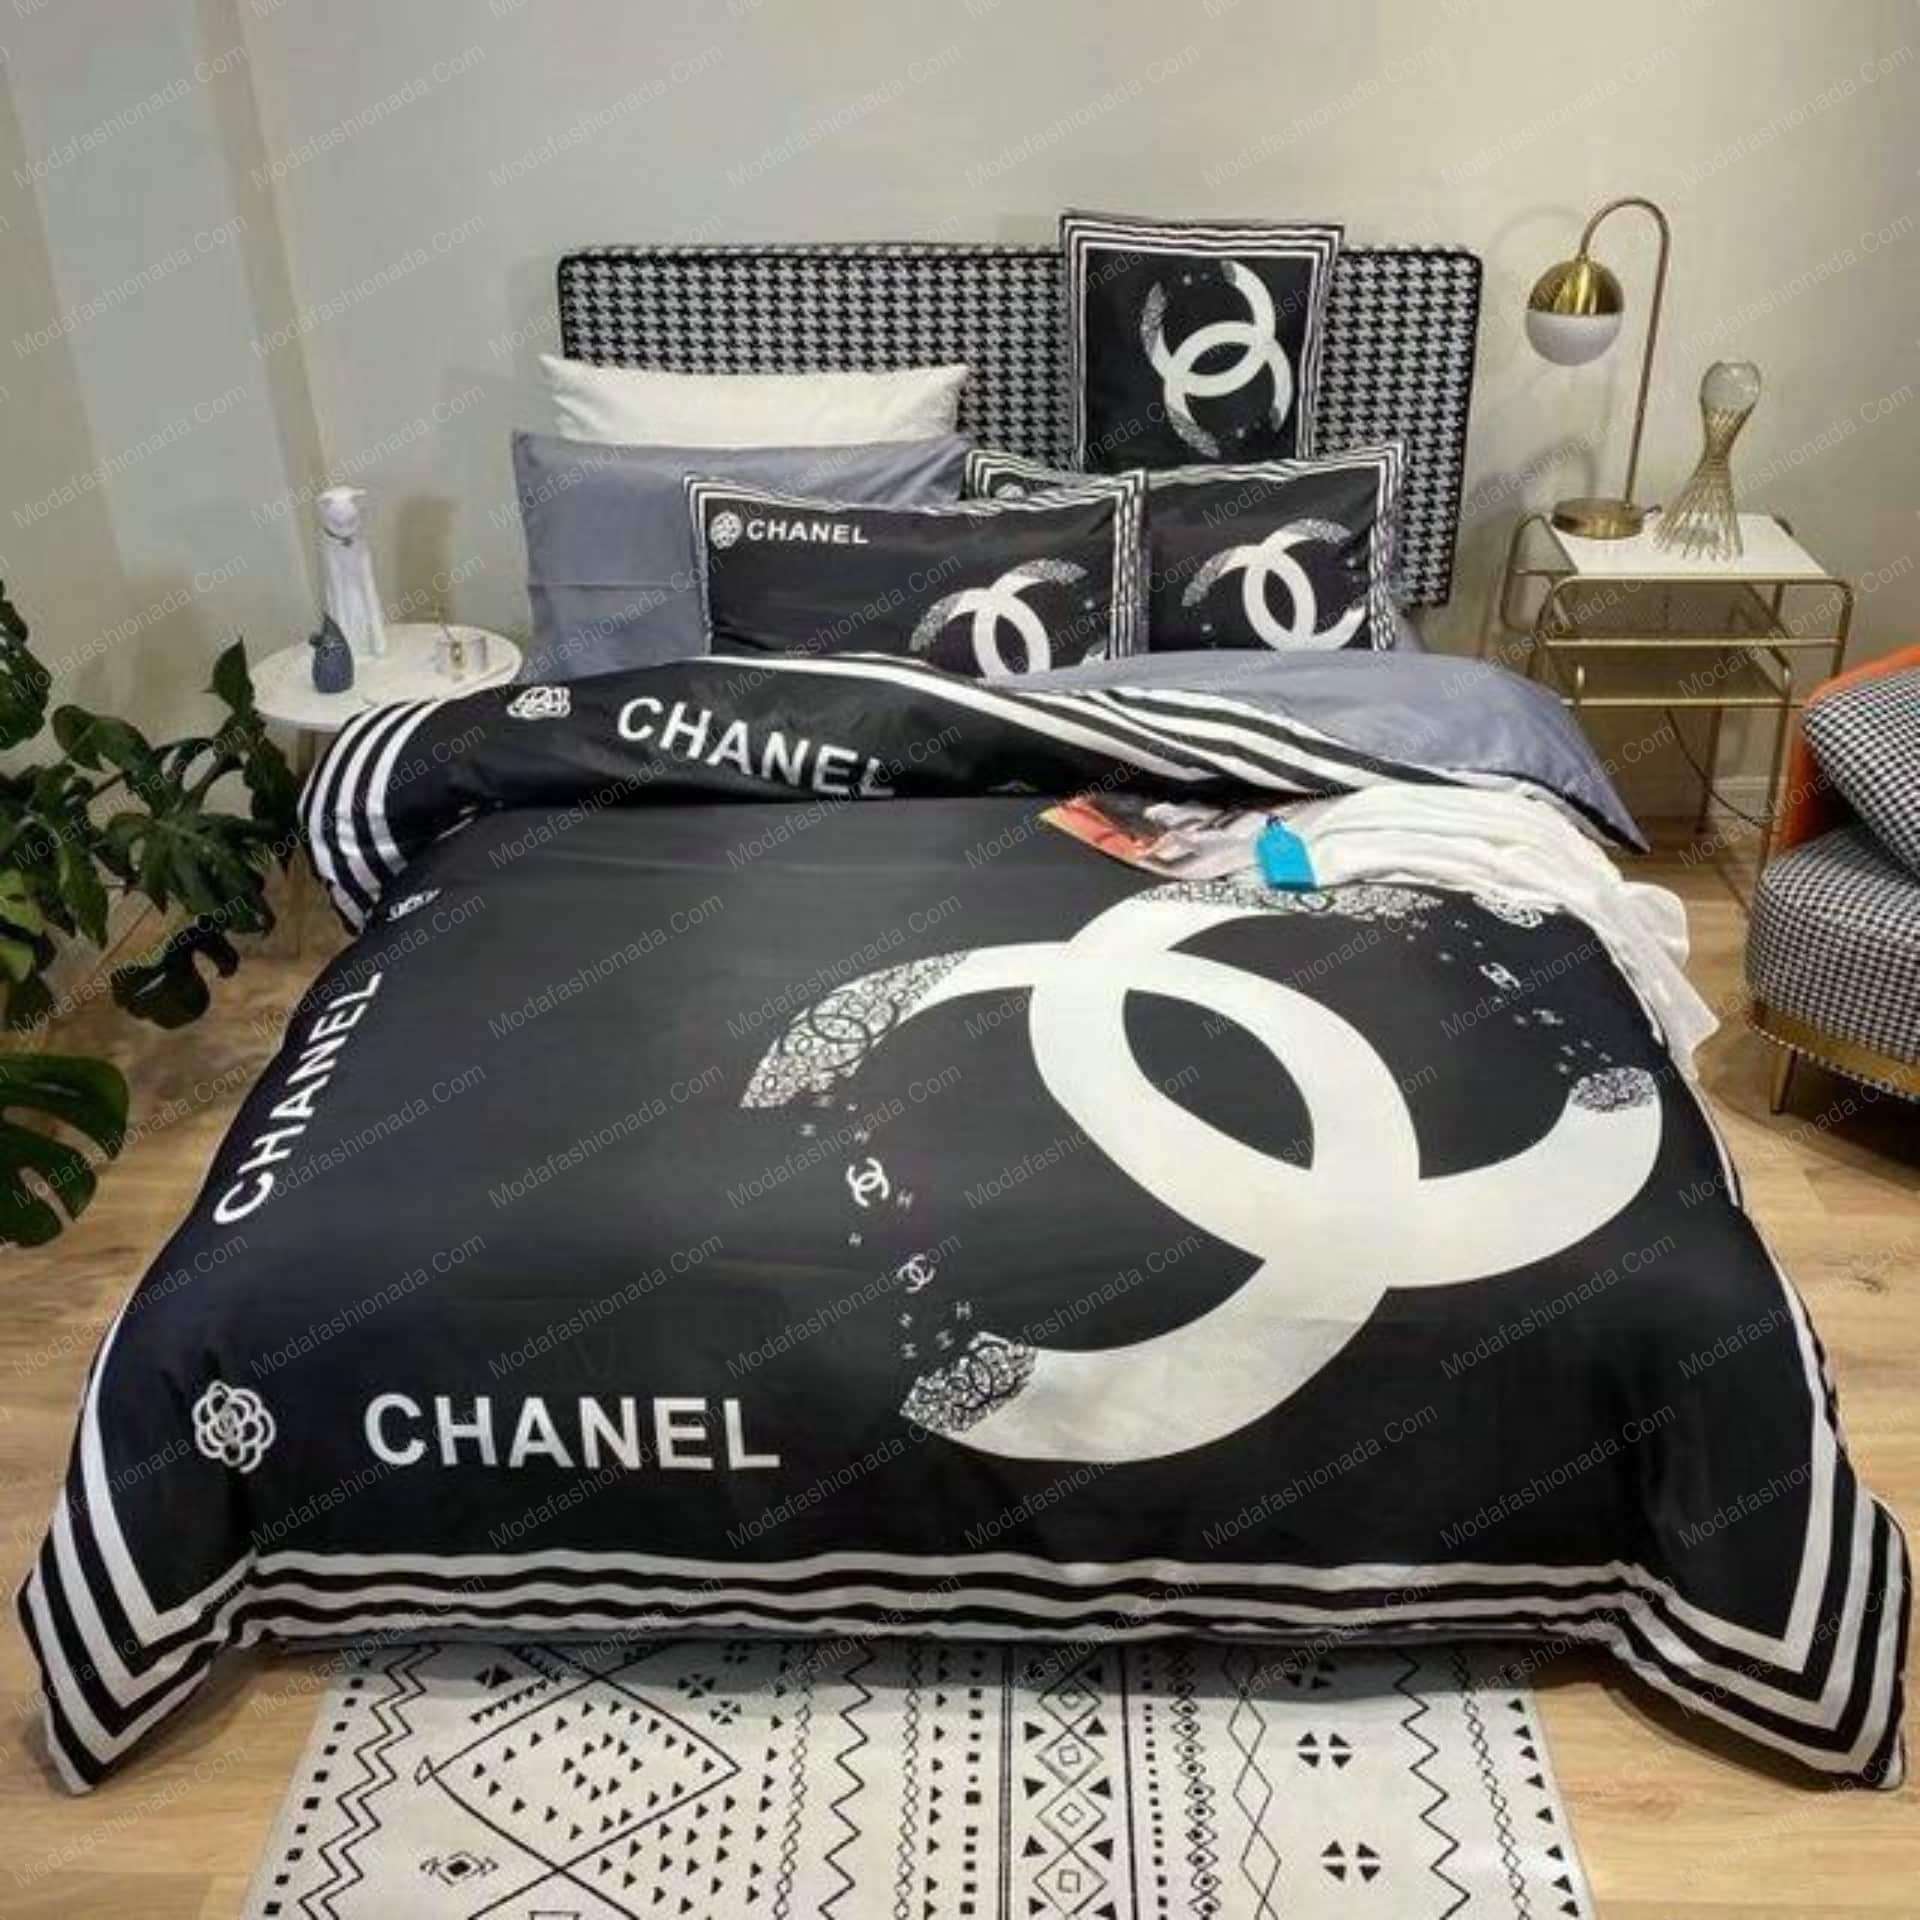 Luxury Chanel Brands 1 Bedding Set – Duvet Cover – 3D New Luxury – Twin Full Queen King Size Comforter Cover